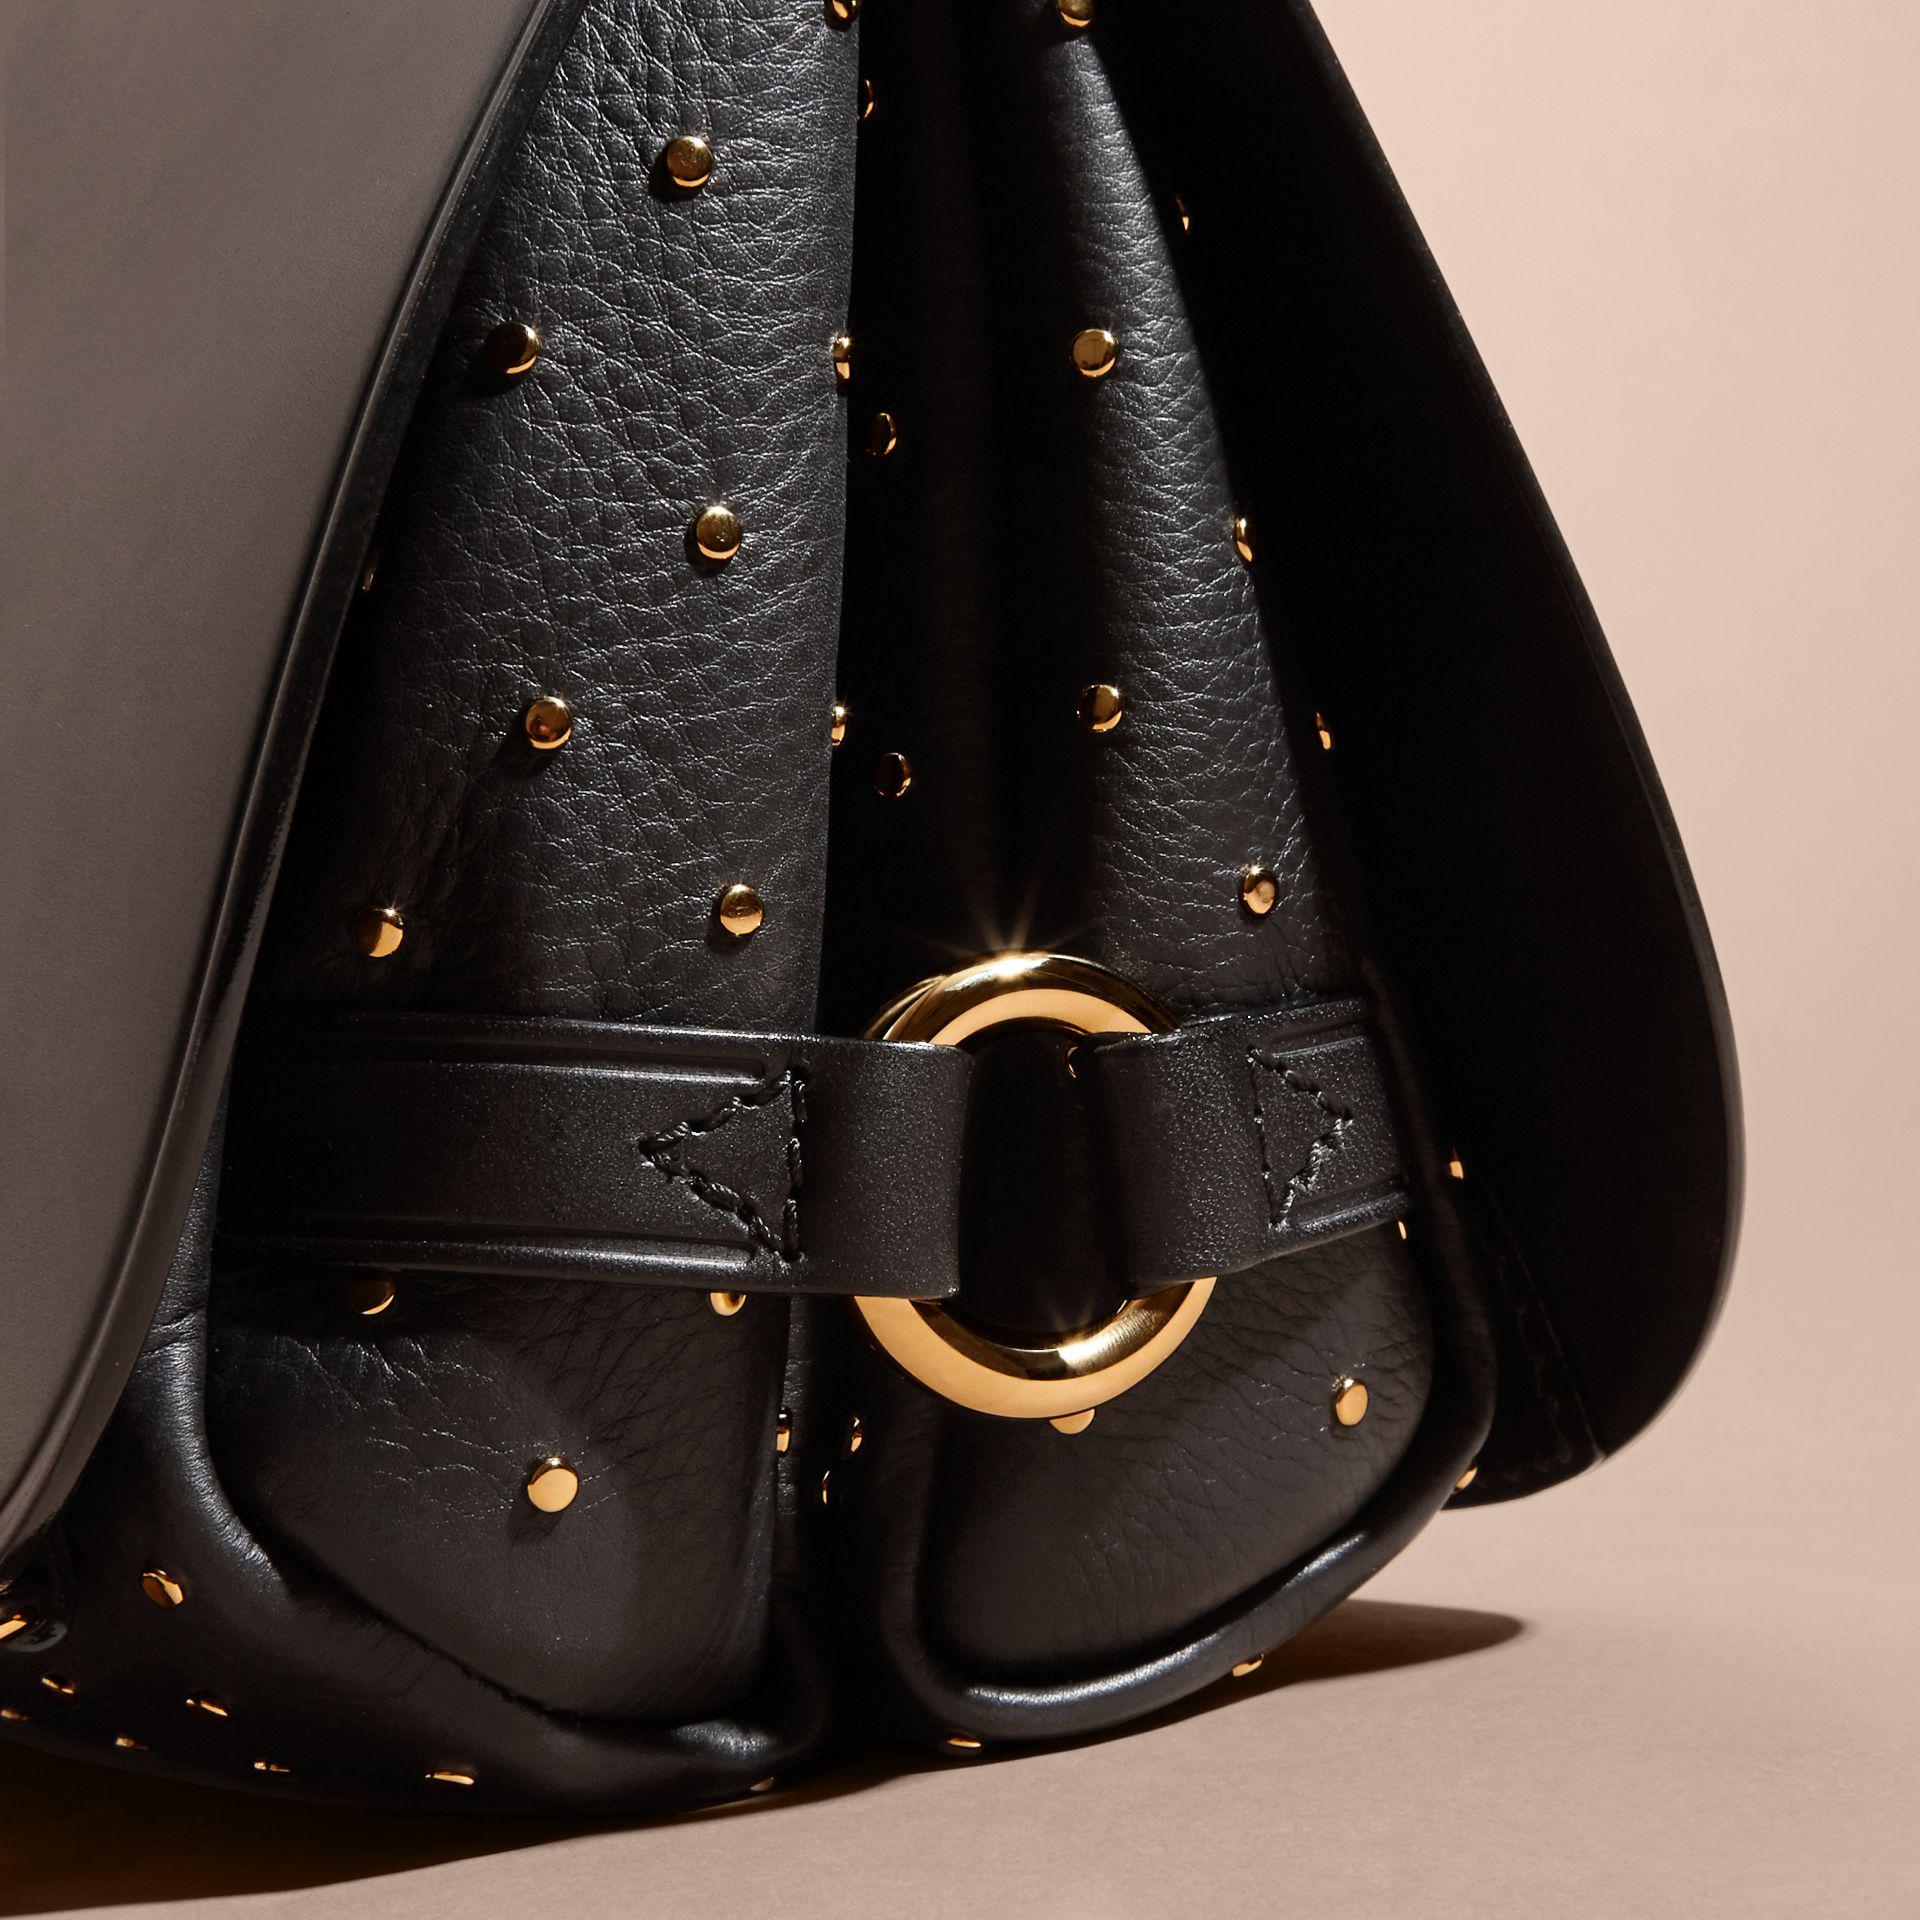 Burberry The Bridle Leather Shoulder Bag in Black - Lyst